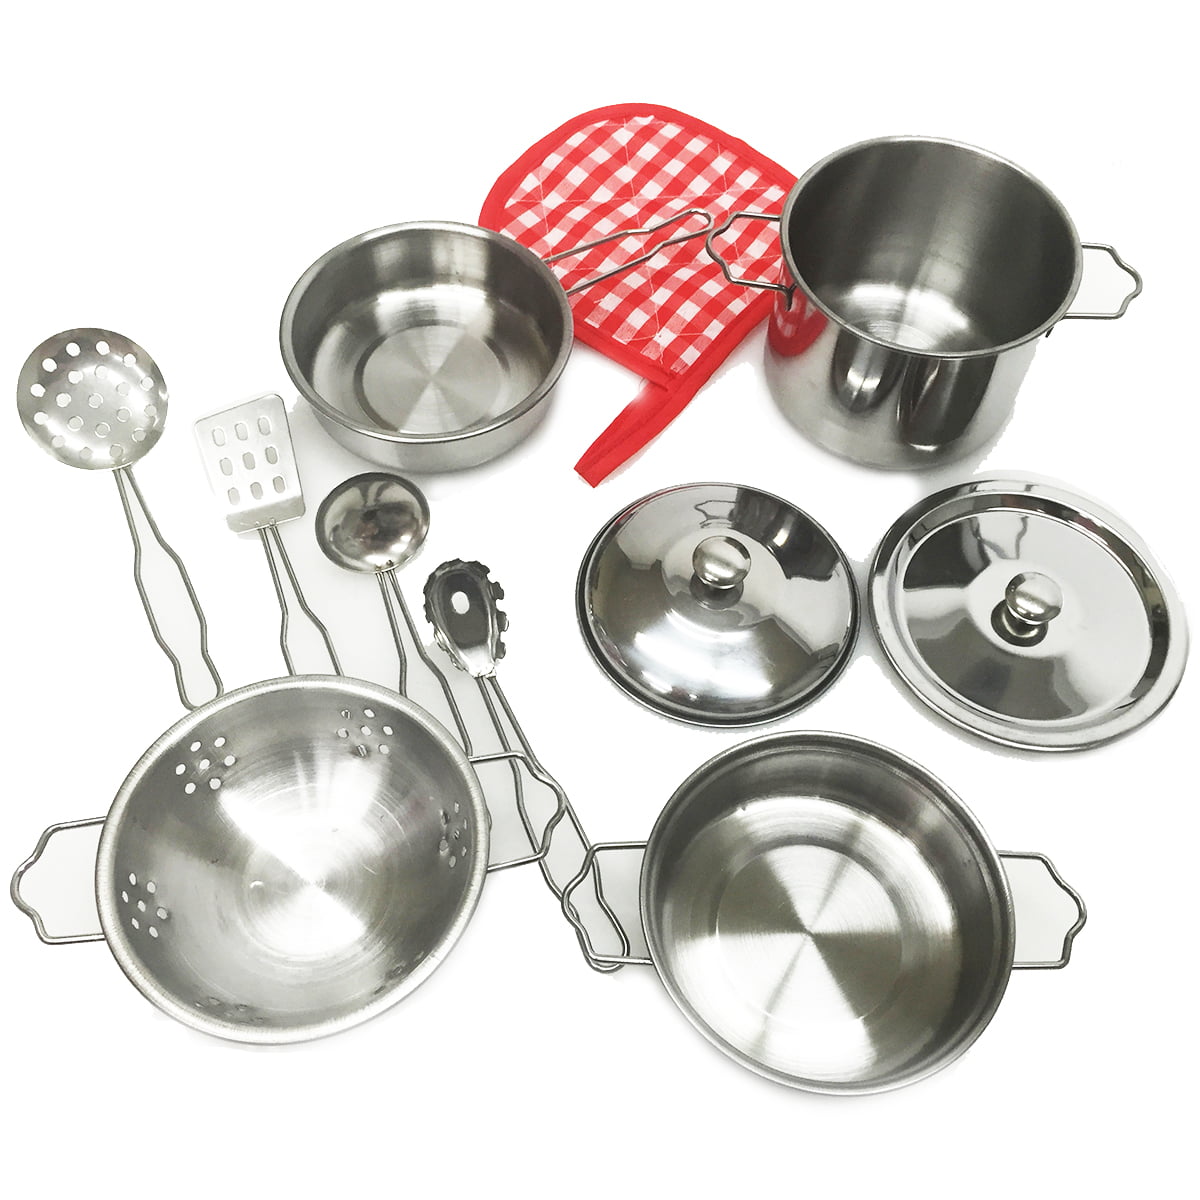 best set of non stick pots and pans to buy